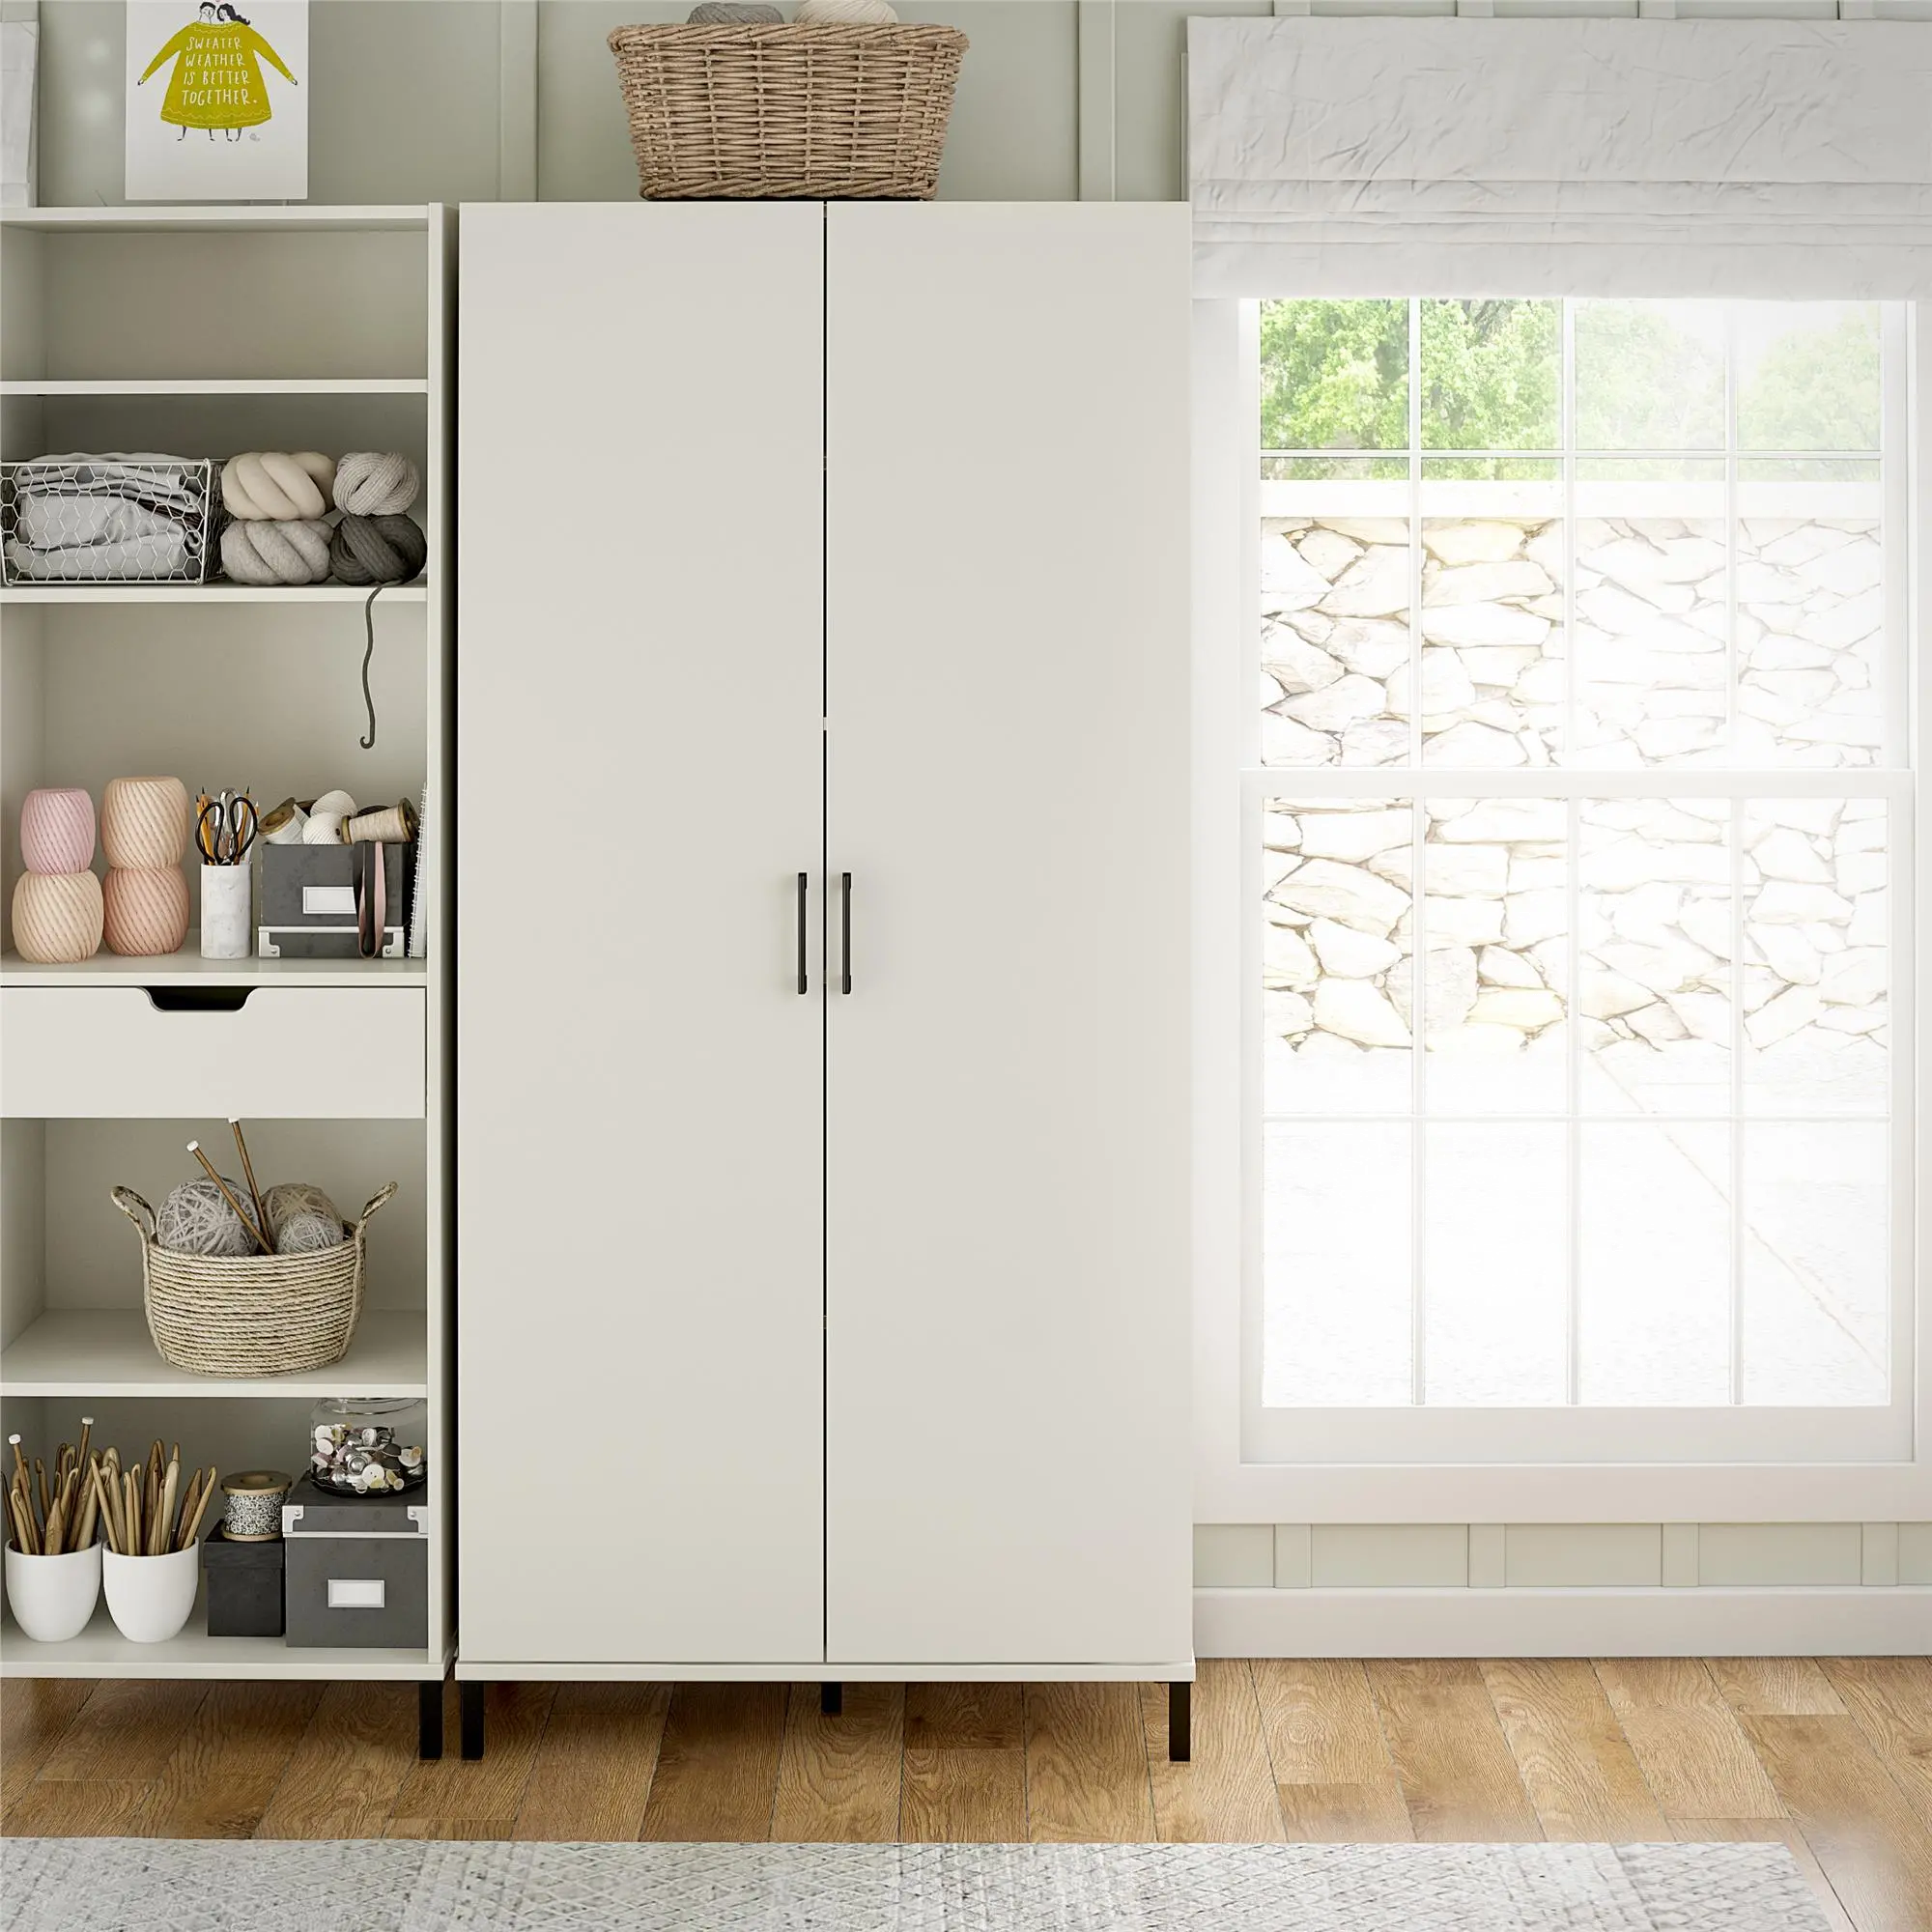 https://static.rcwilley.com/products/112859003/Versa-White-36-2-Door-Storage-Cabinet-rcwilley-image1.webp